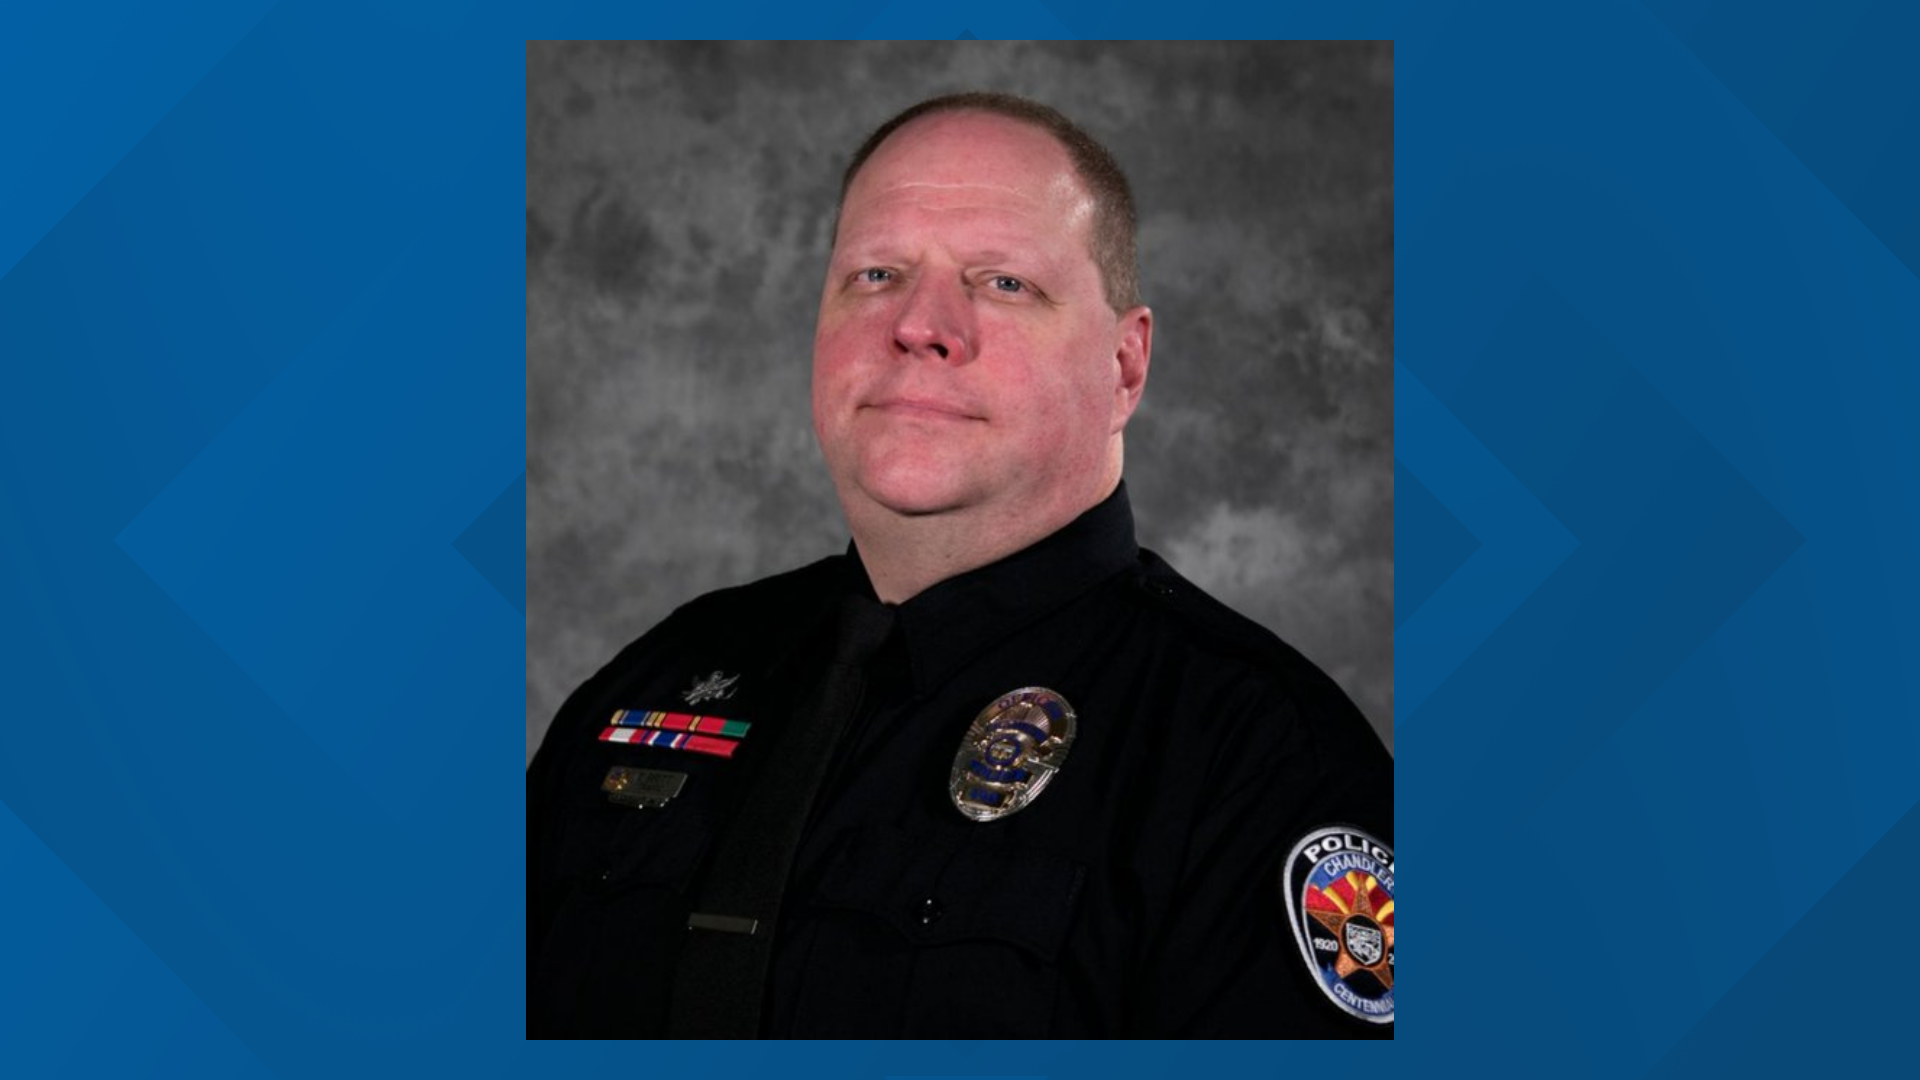 The Chandler Police Department lost a long-time officer on Monday, who the department says died after a prolonged battle with COVID-19.